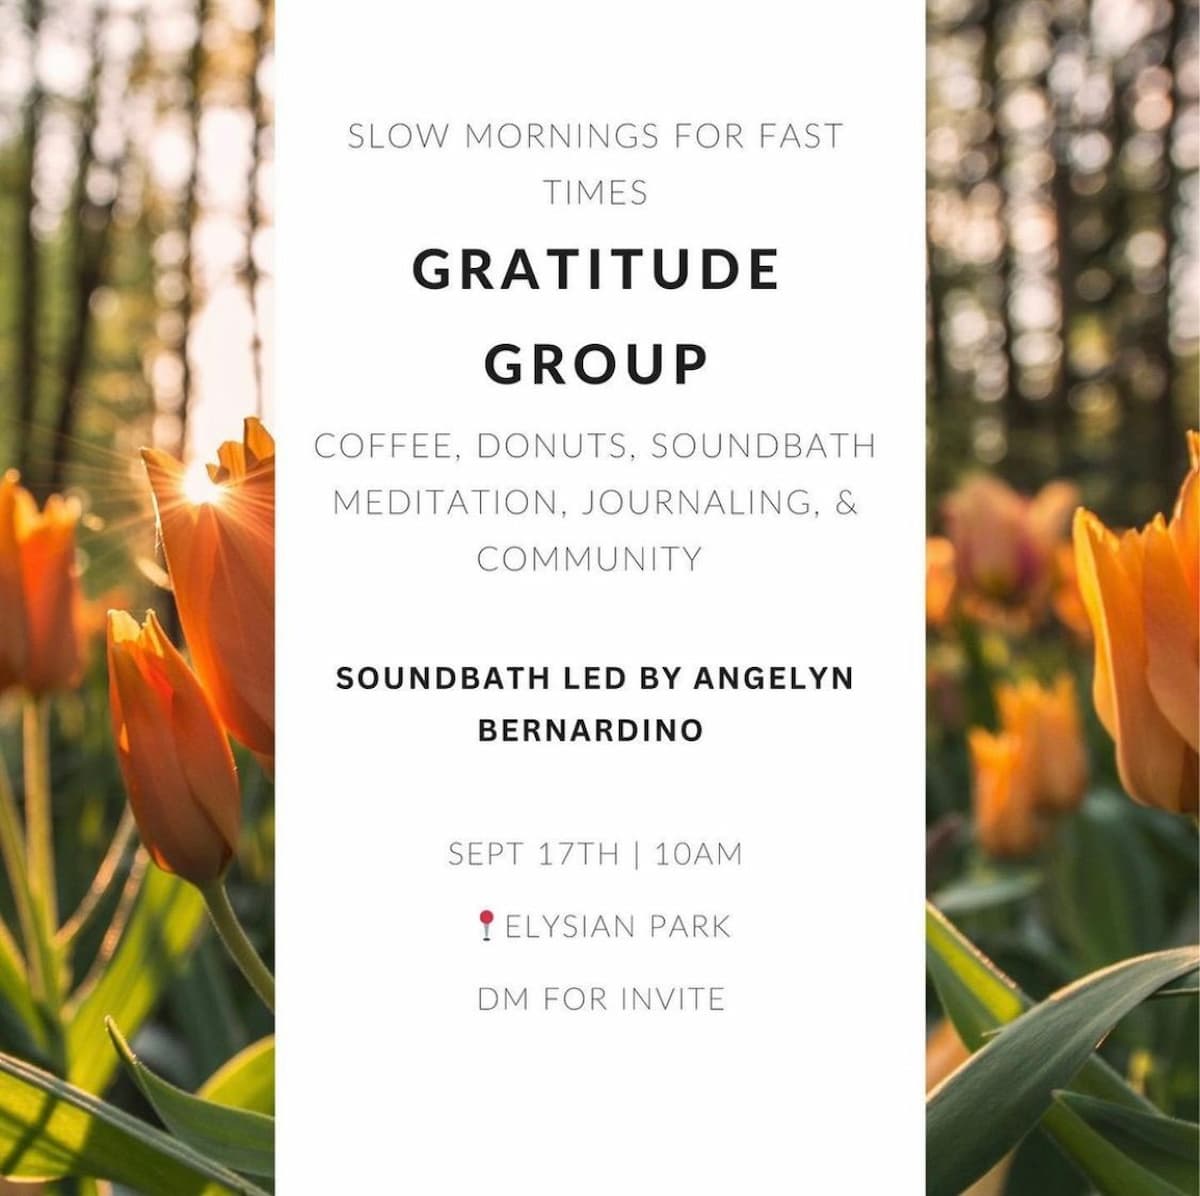 Slow Mornings For Fast Times Gratitude Group 